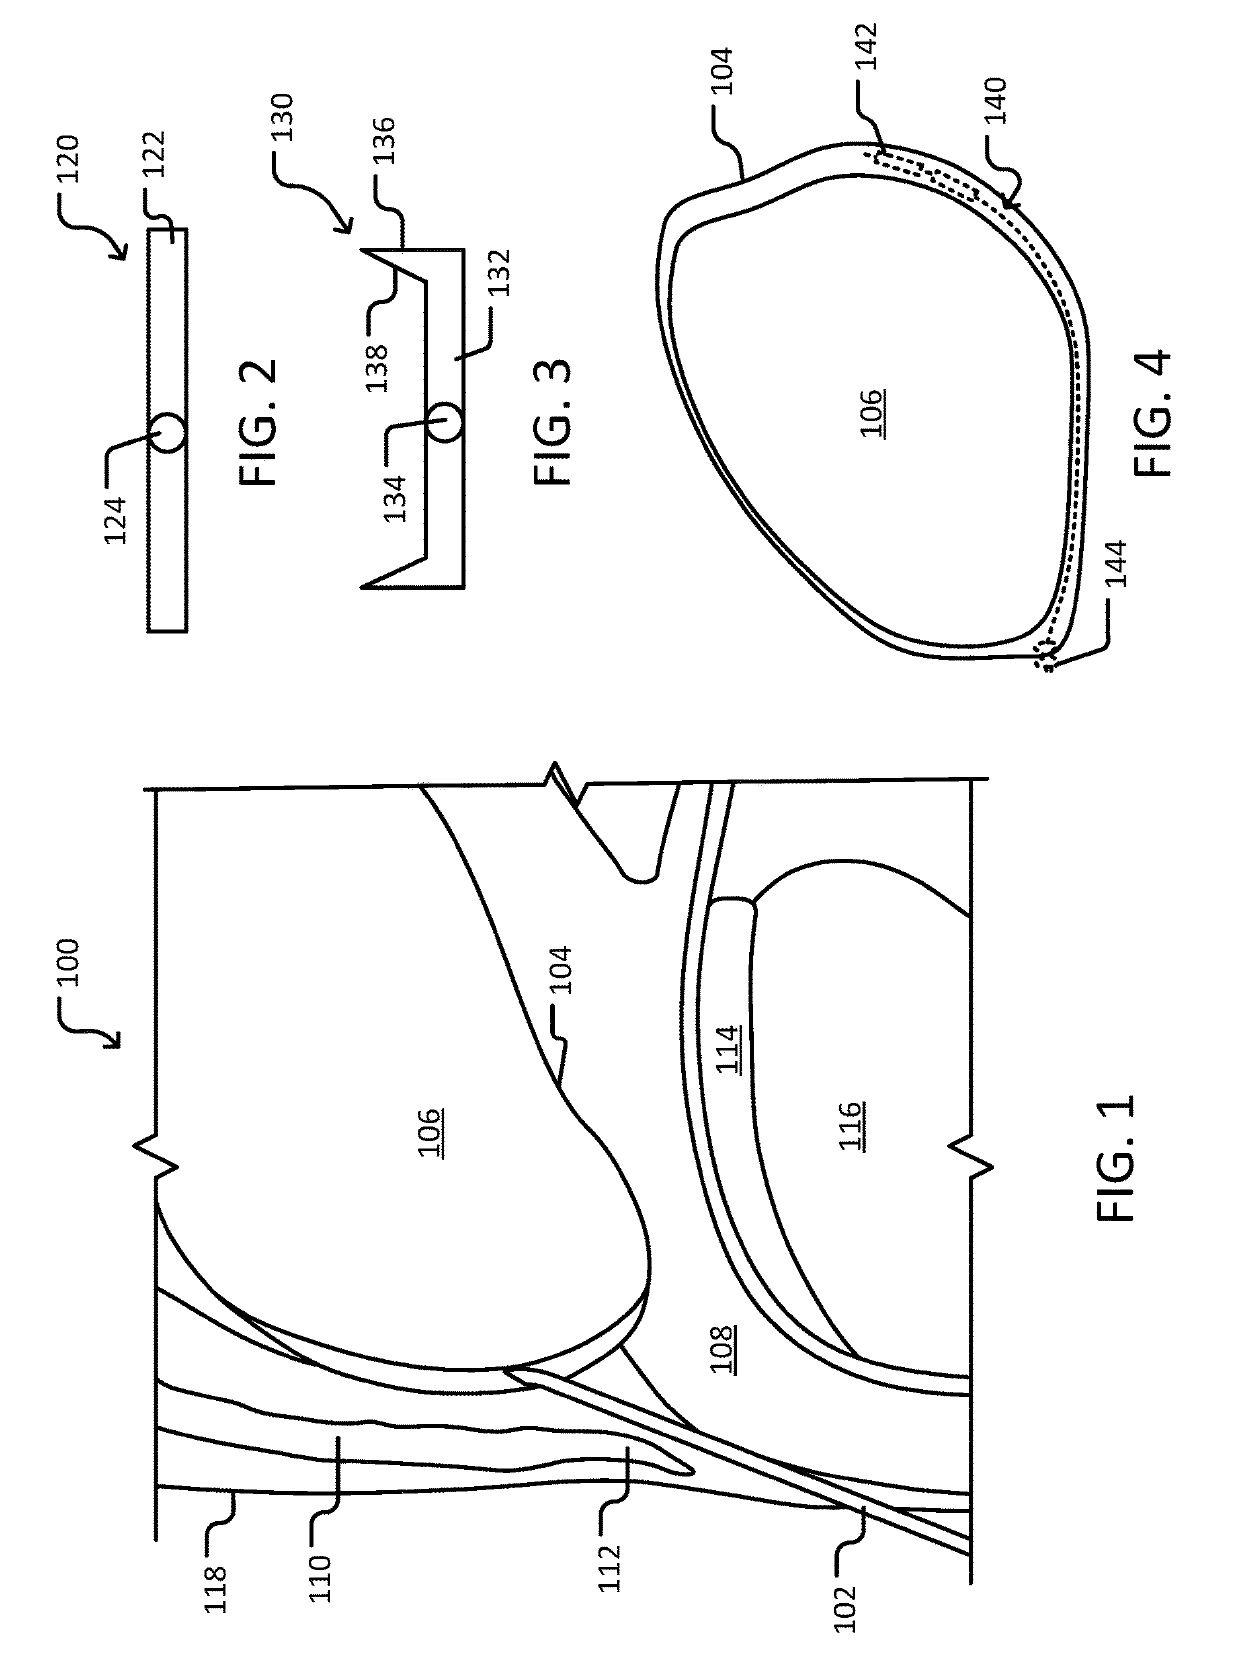 Systems and methods for implantable devices